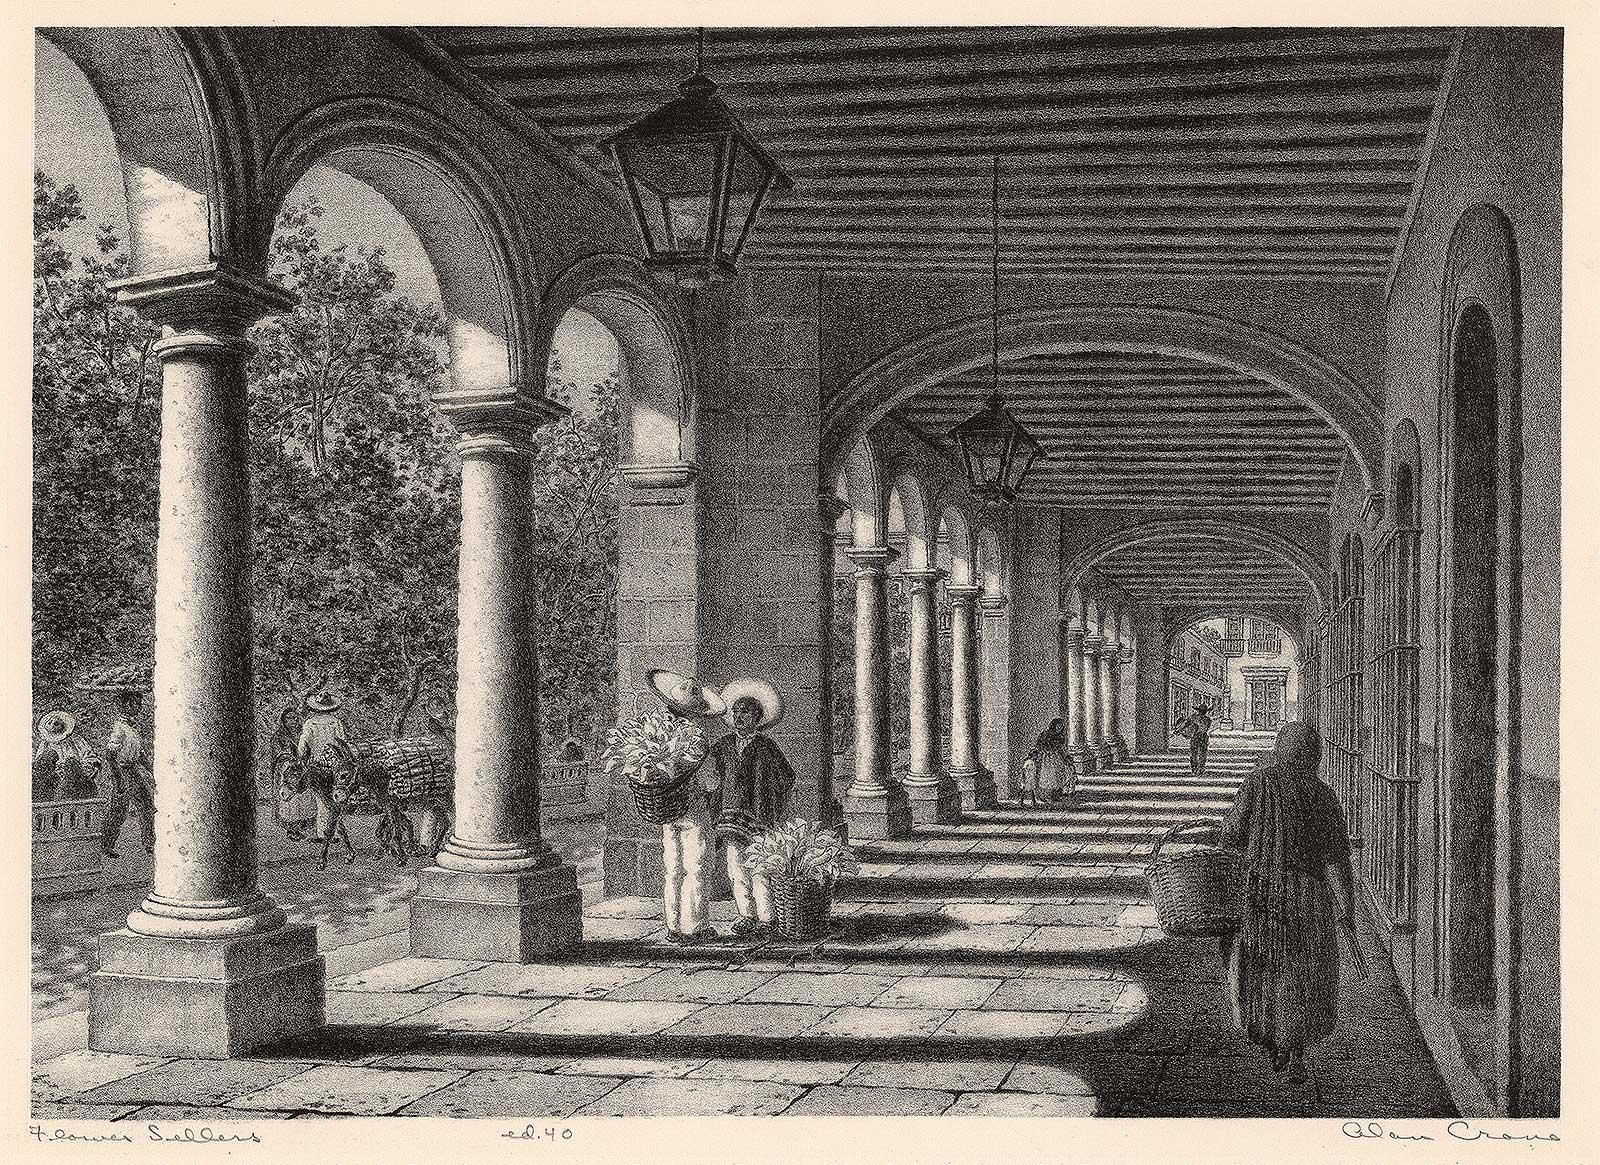 Flower Sellers (Market day in Mexico underneath the colonnade) - Gray Landscape Print by Alan Horton Crane